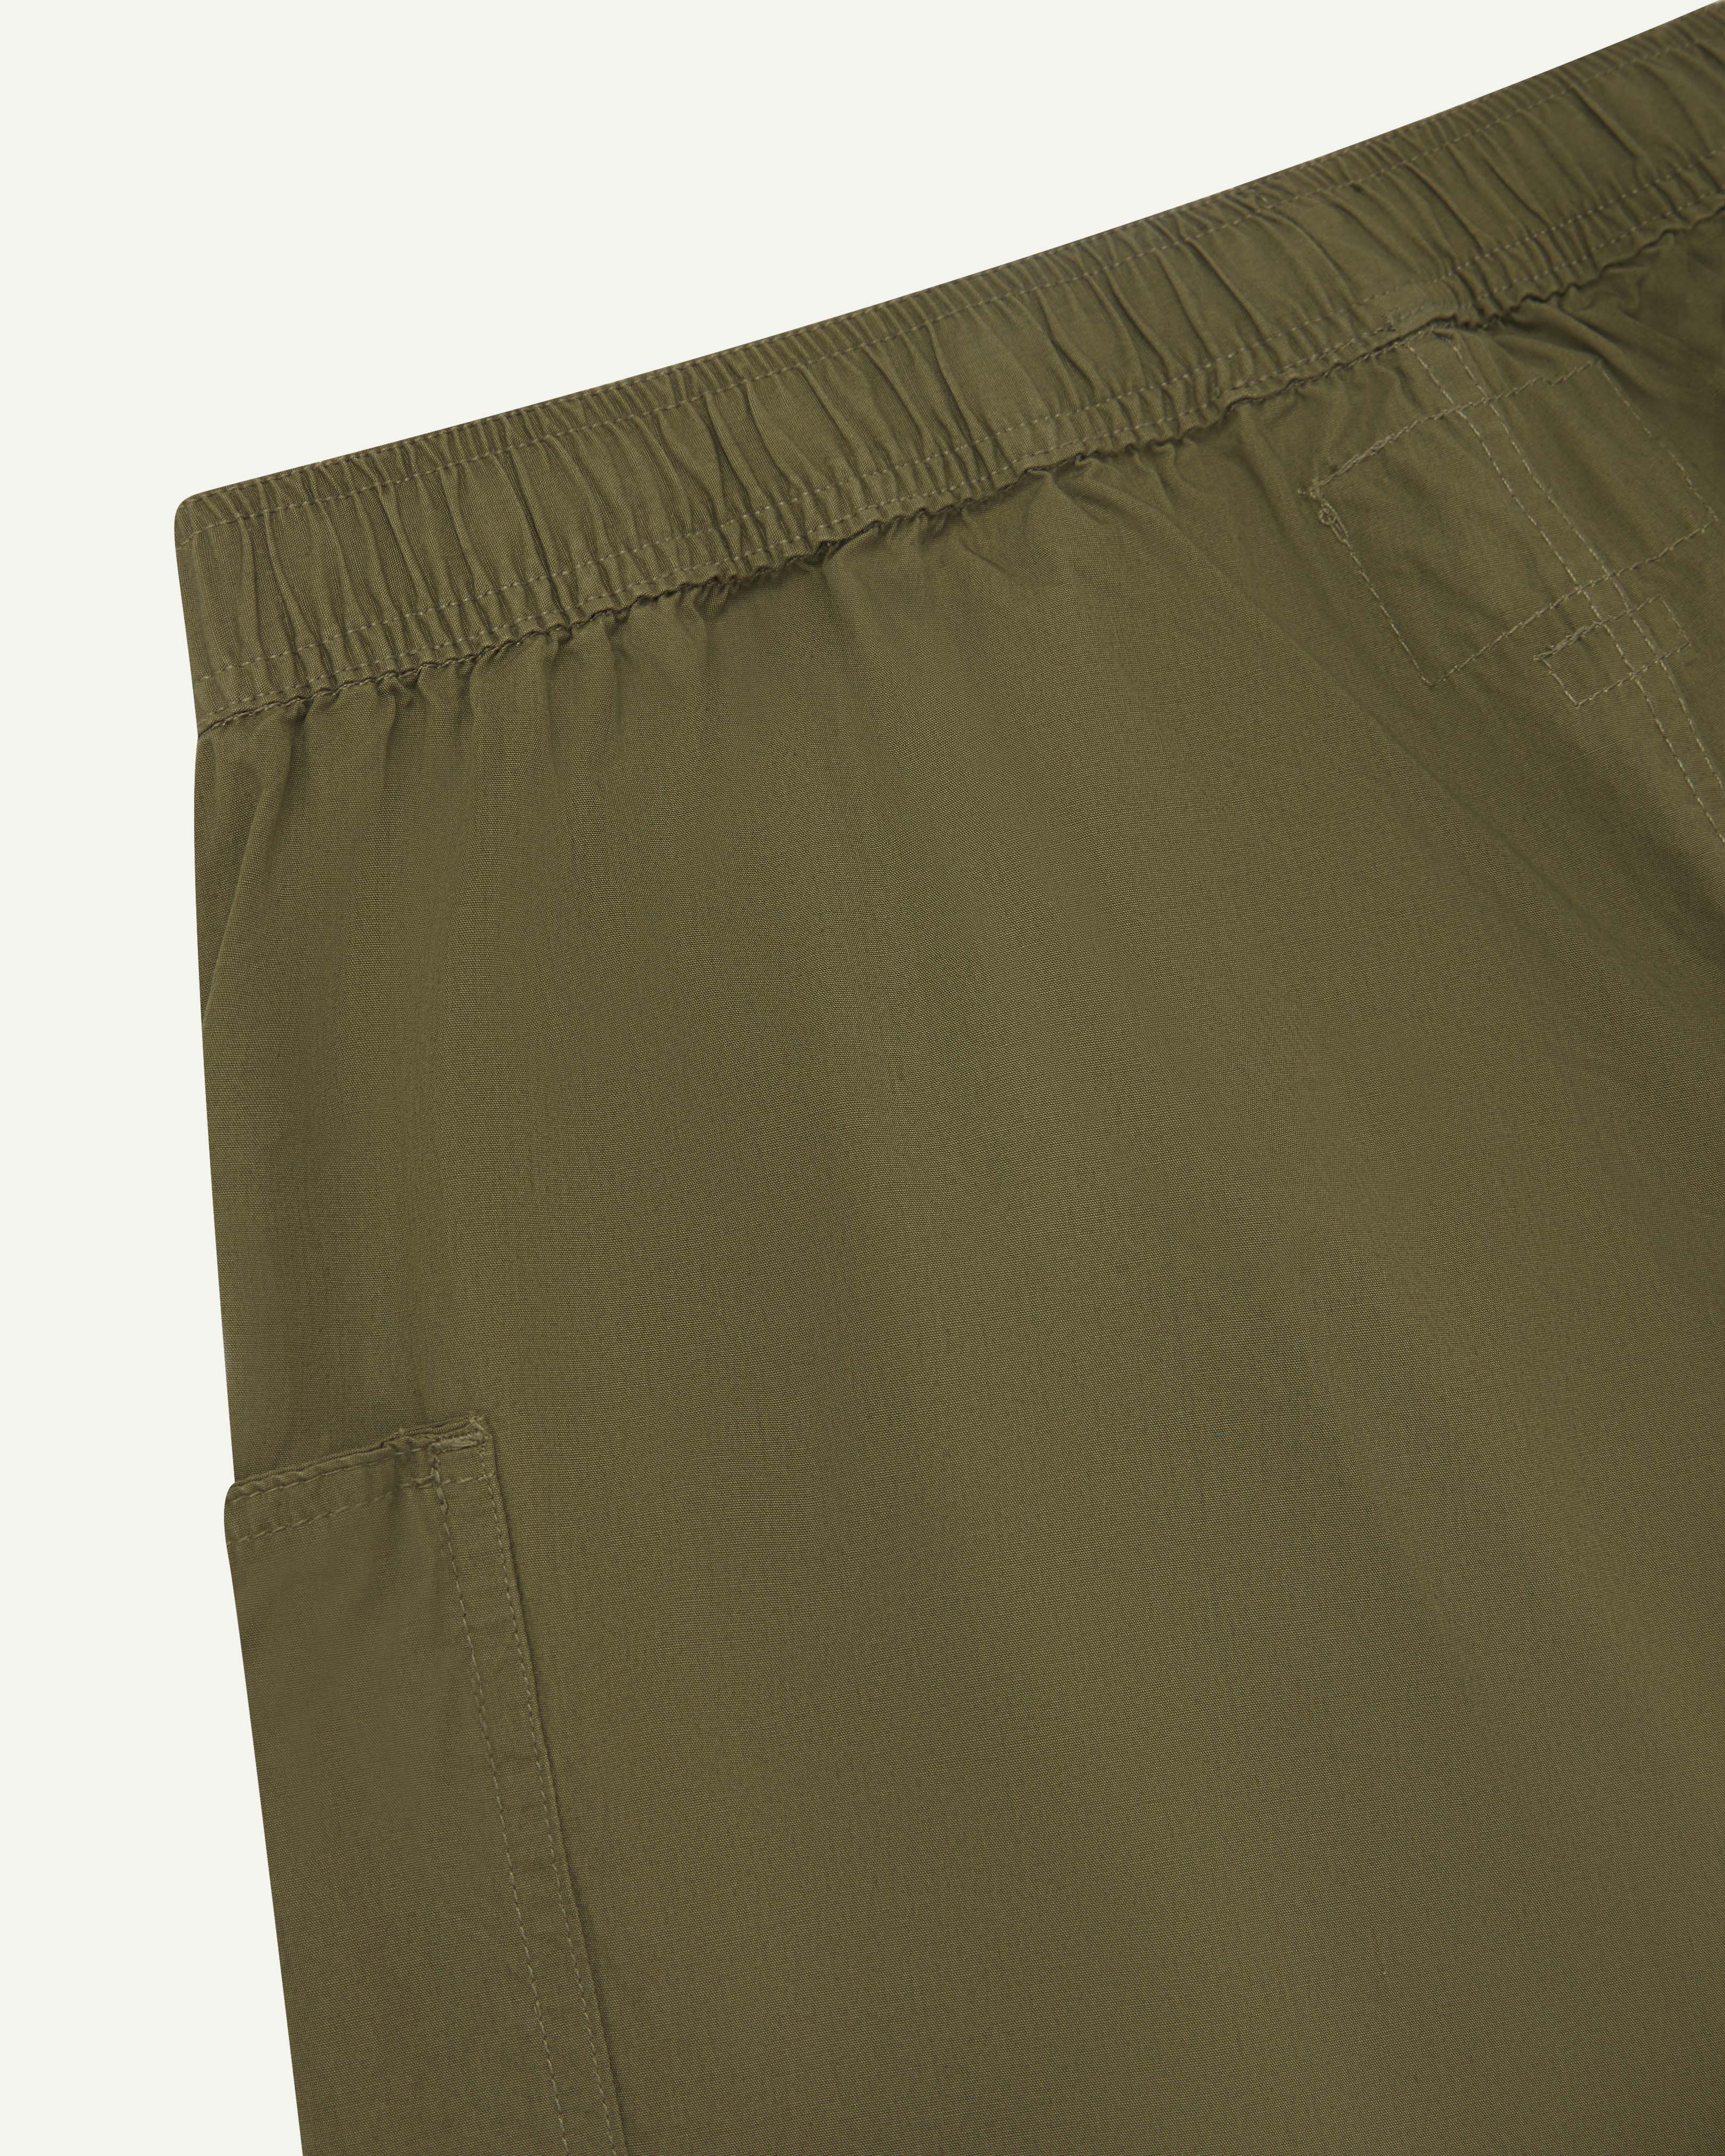 Back view of olive green organic cotton #5015 lightweight cotton shorts by Uskees. Clear view of  elasticated waist